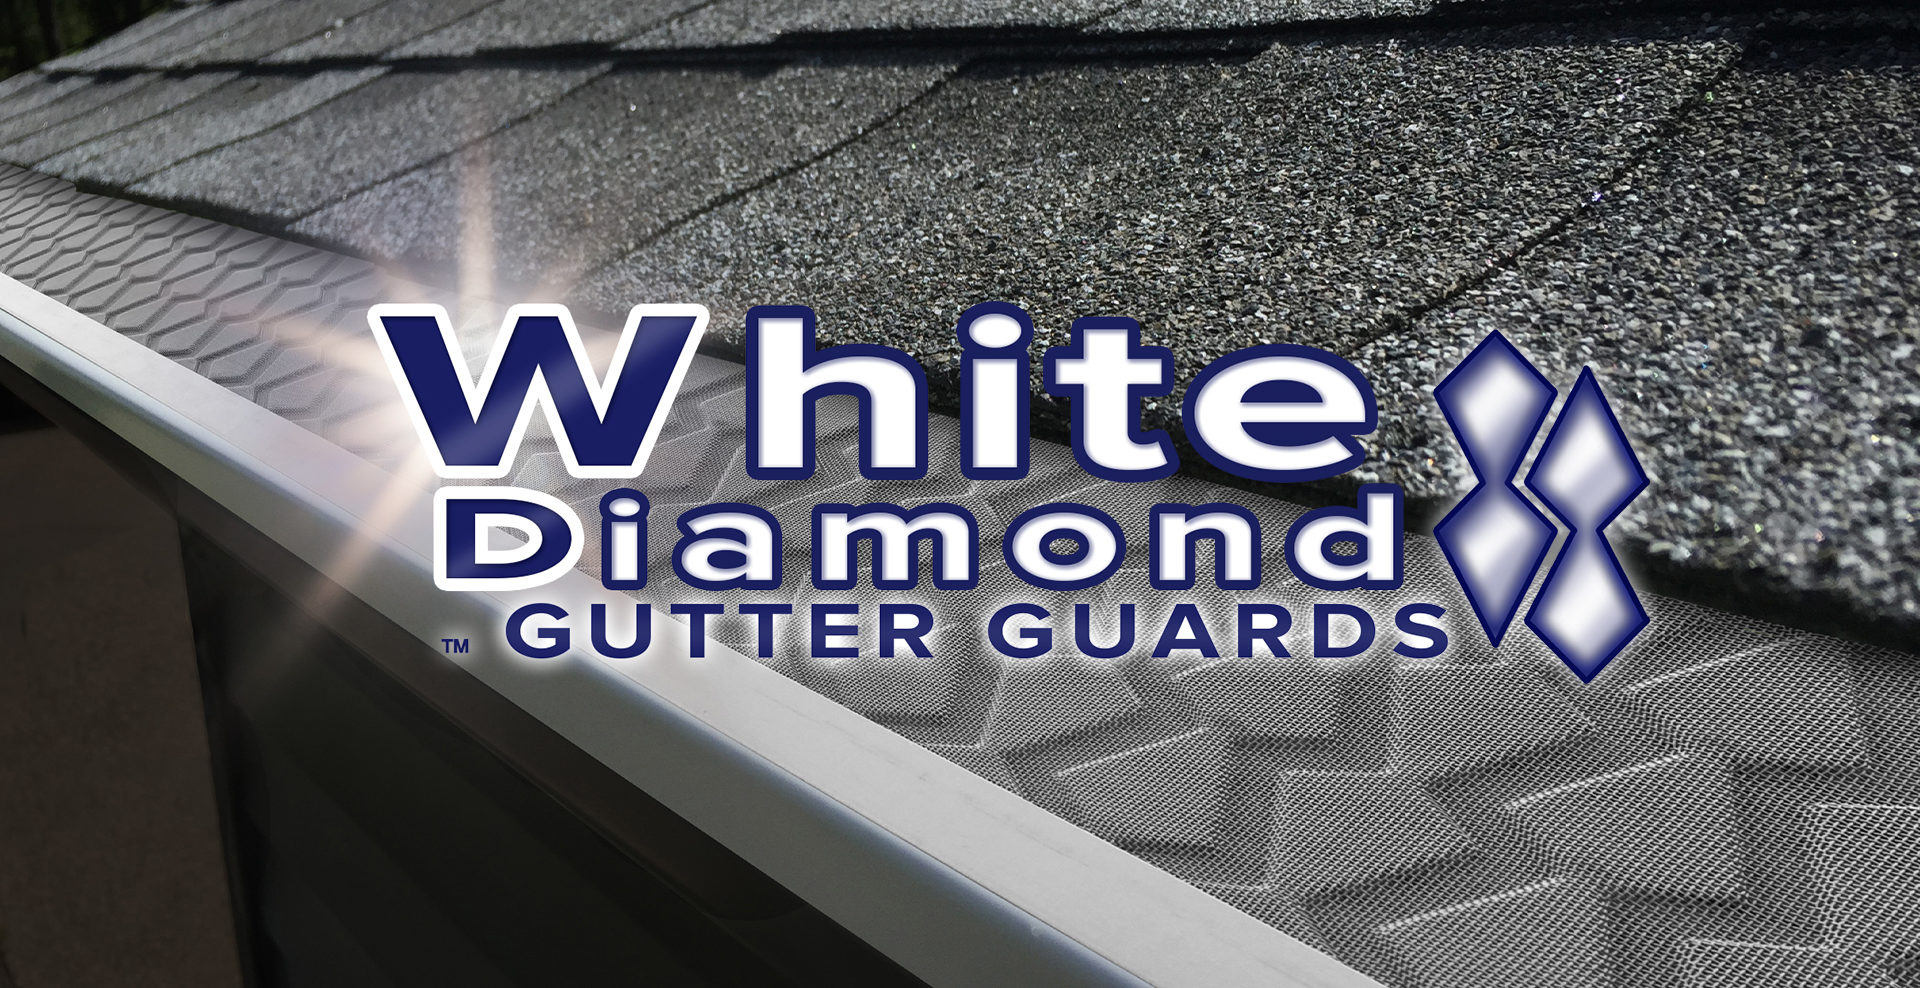 The Snap In Gutter Guard Offers An Economical Vinyl Solution For Gutter Protection